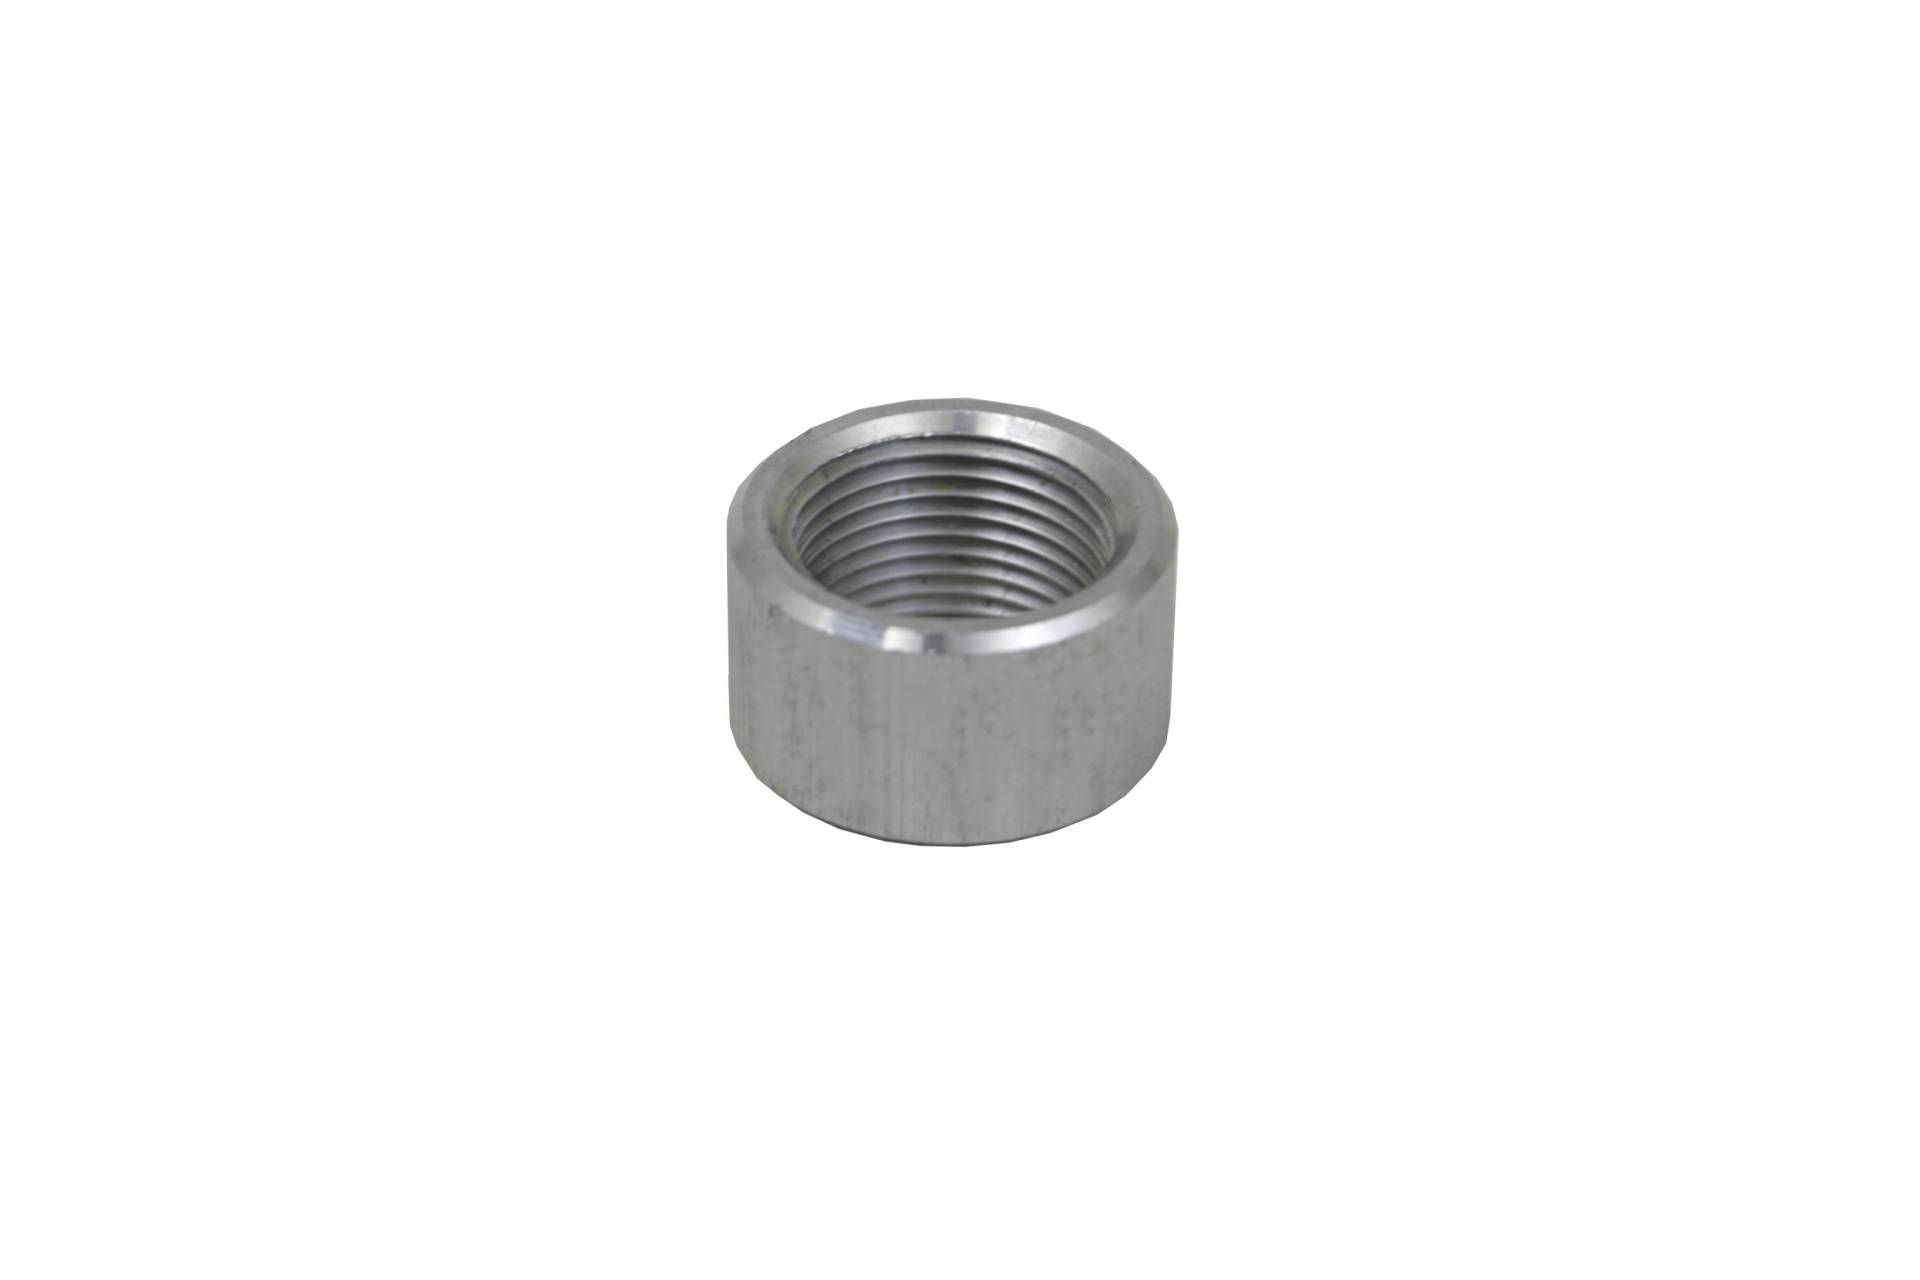 Wizard Cooling Inc - Weldable Pipe Thread Bungs 1 1/4" NPT Bung